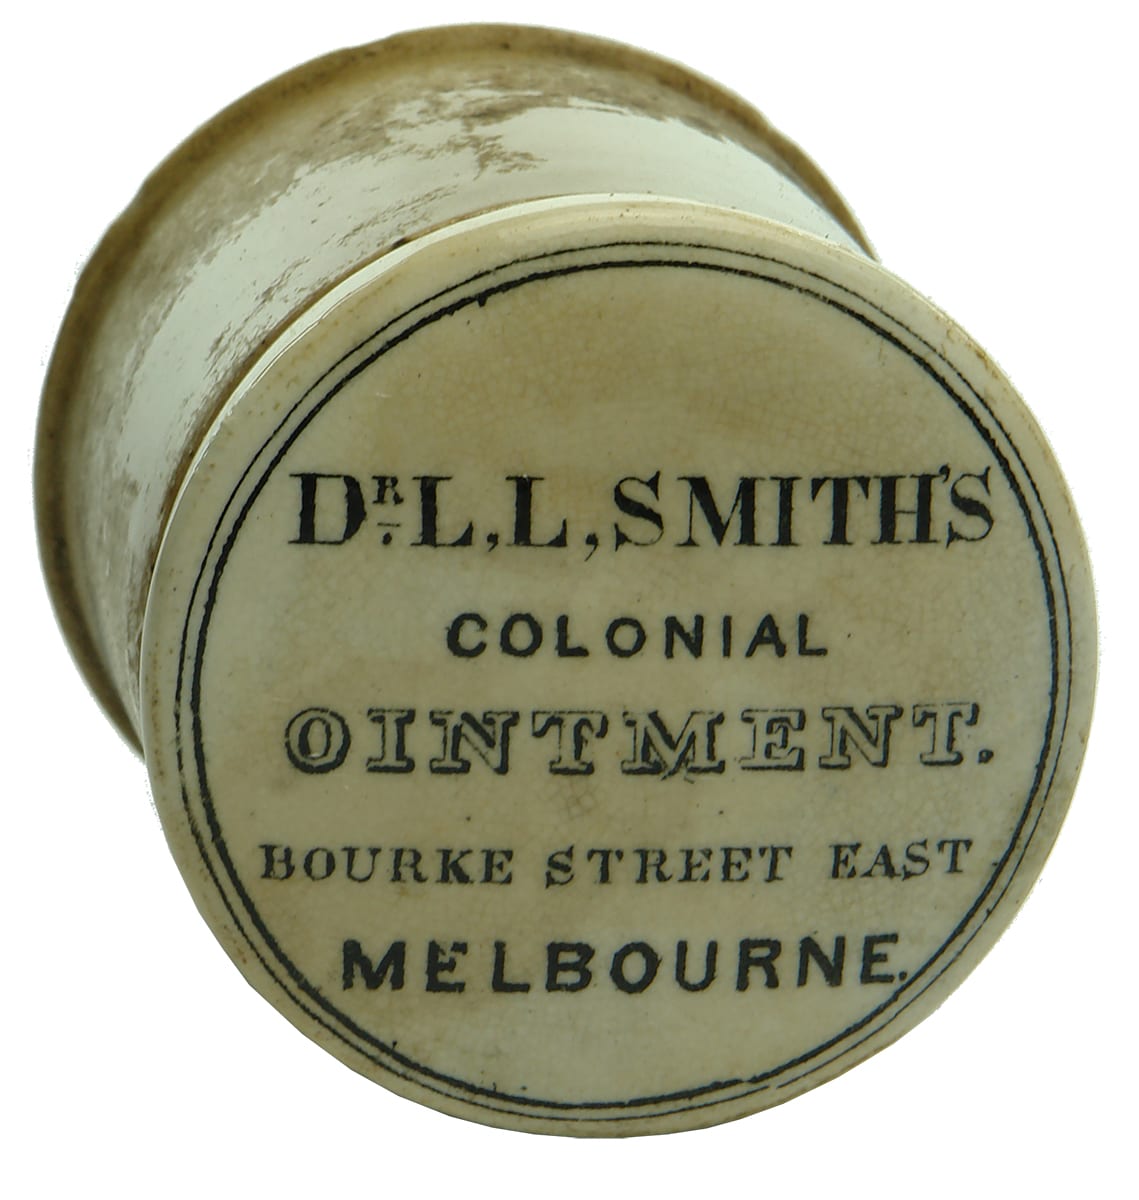 Smith's Colonial Ointment East Melbourne Pot Lid